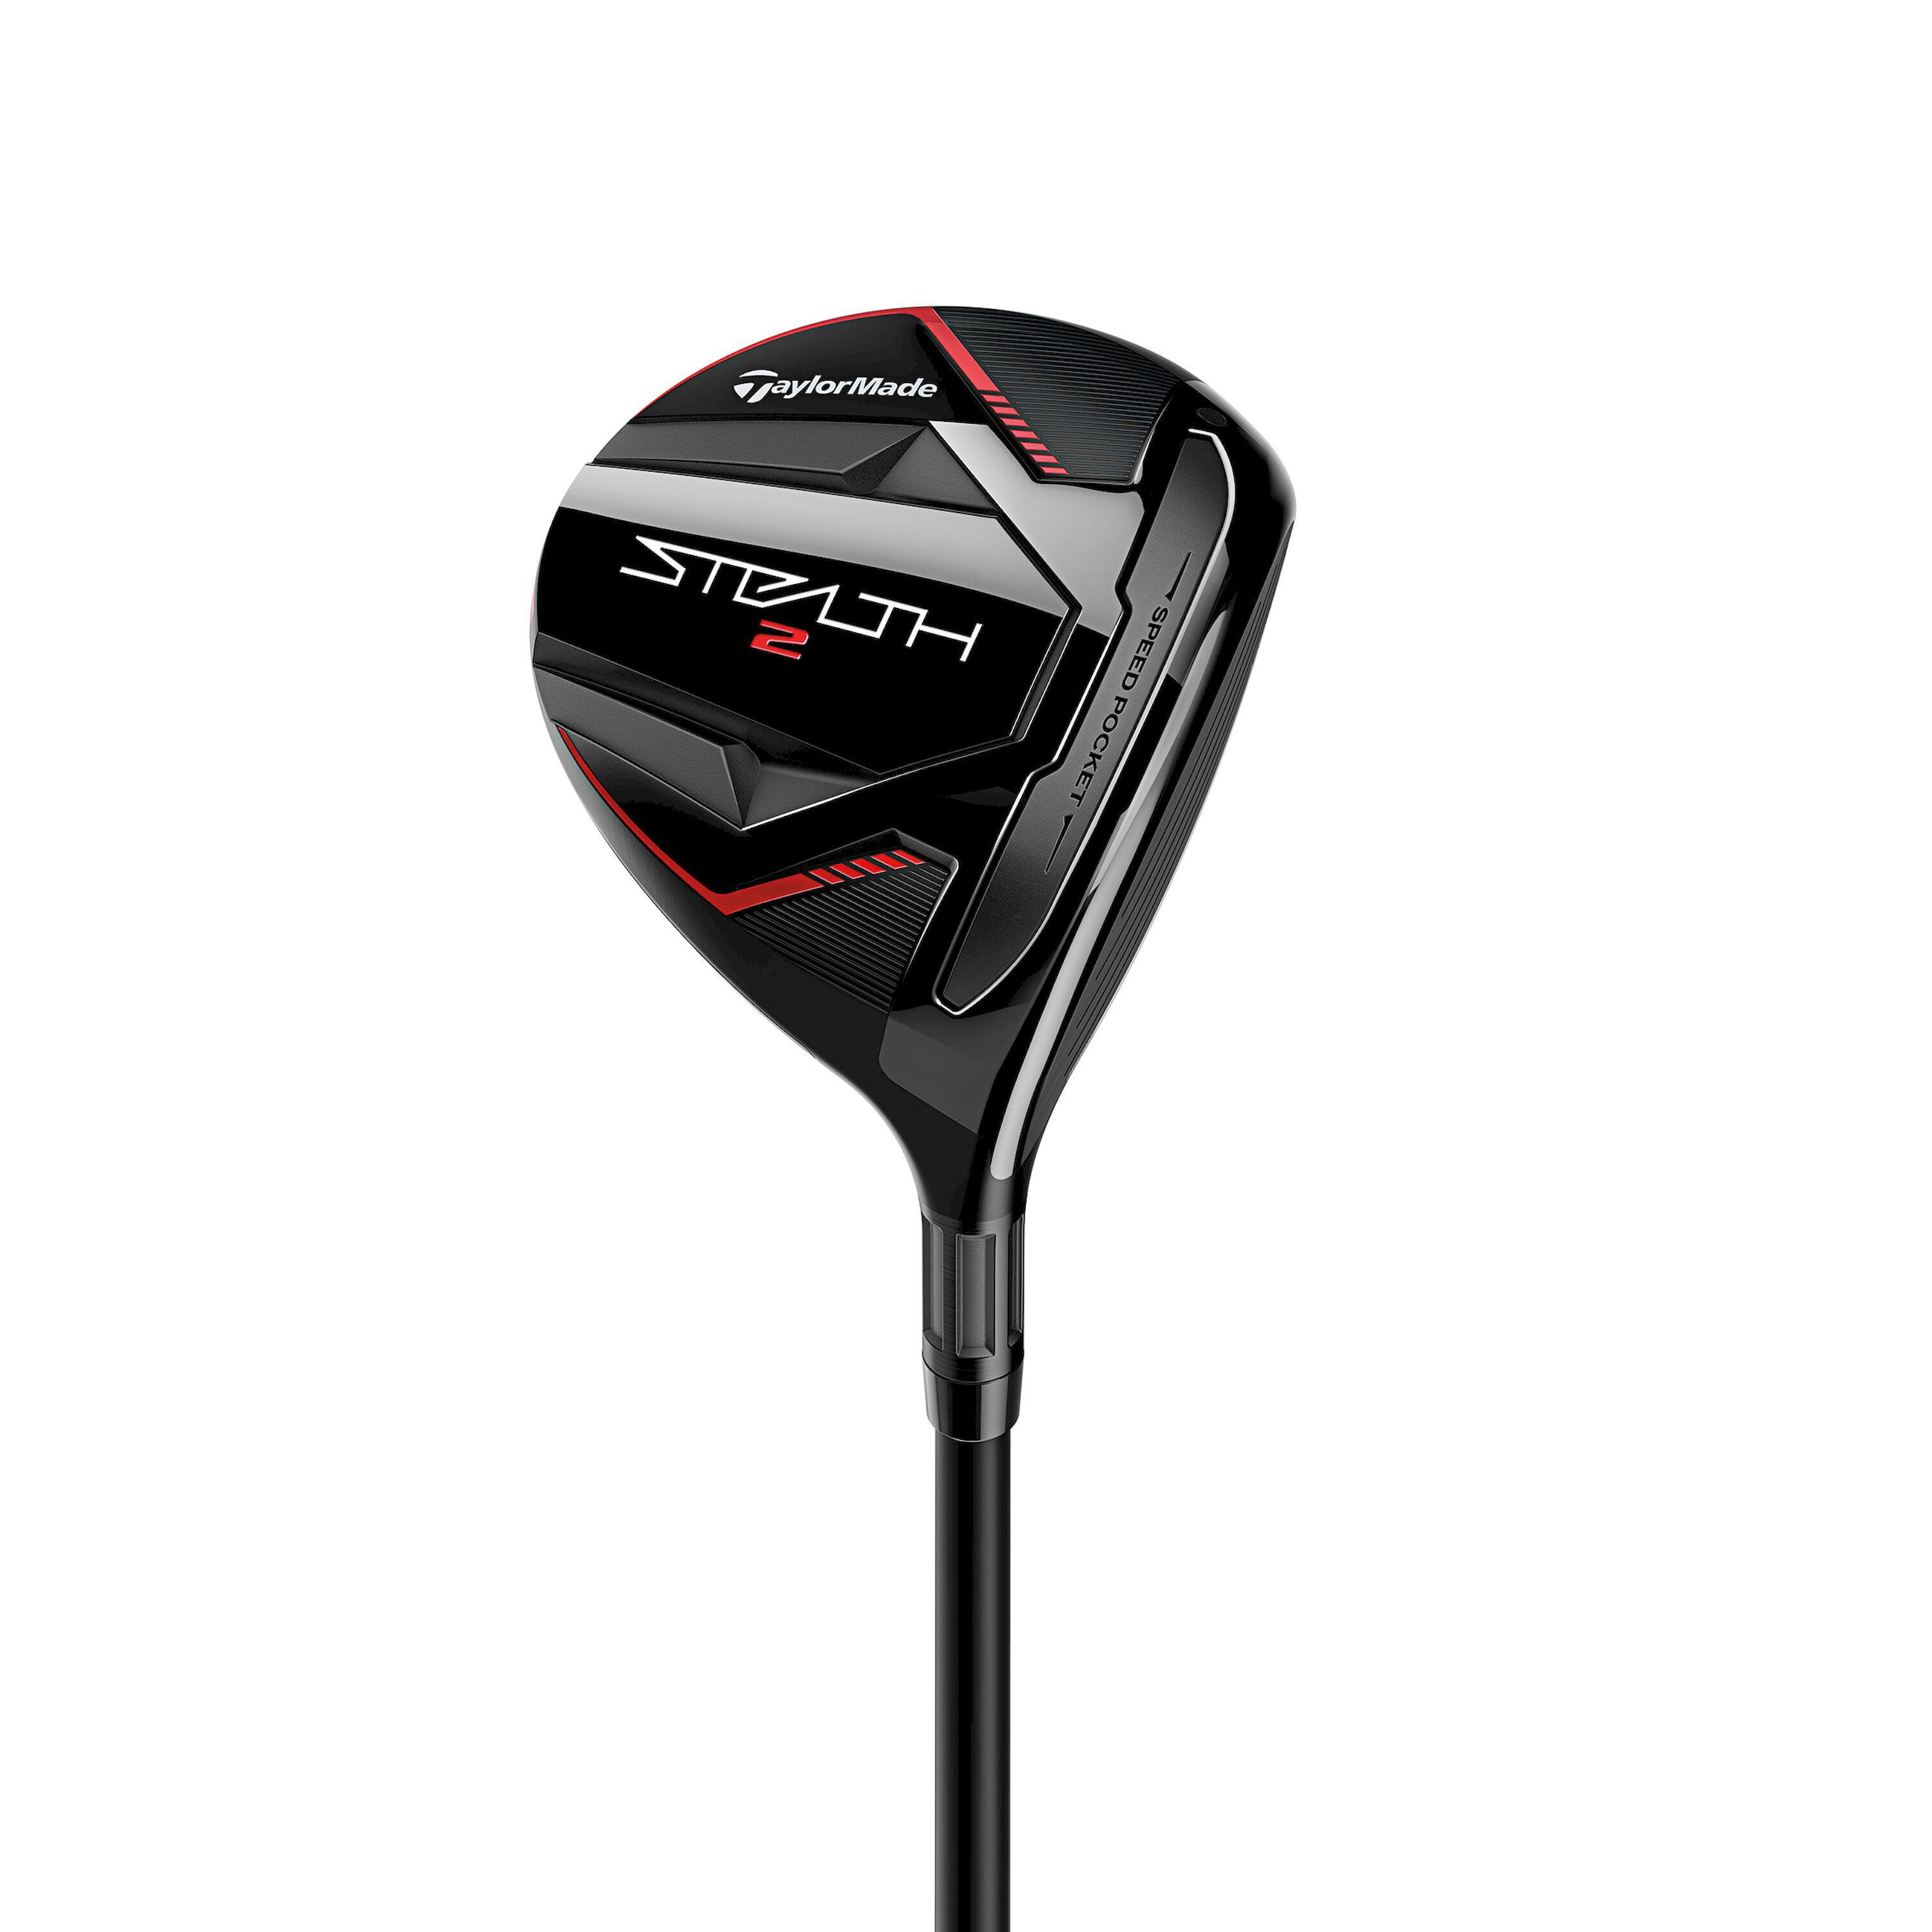 TAYLORMADE GOLF 3-WOOD RIGHT HANDED REGULAR - TAYLORMADE STEALTH 2